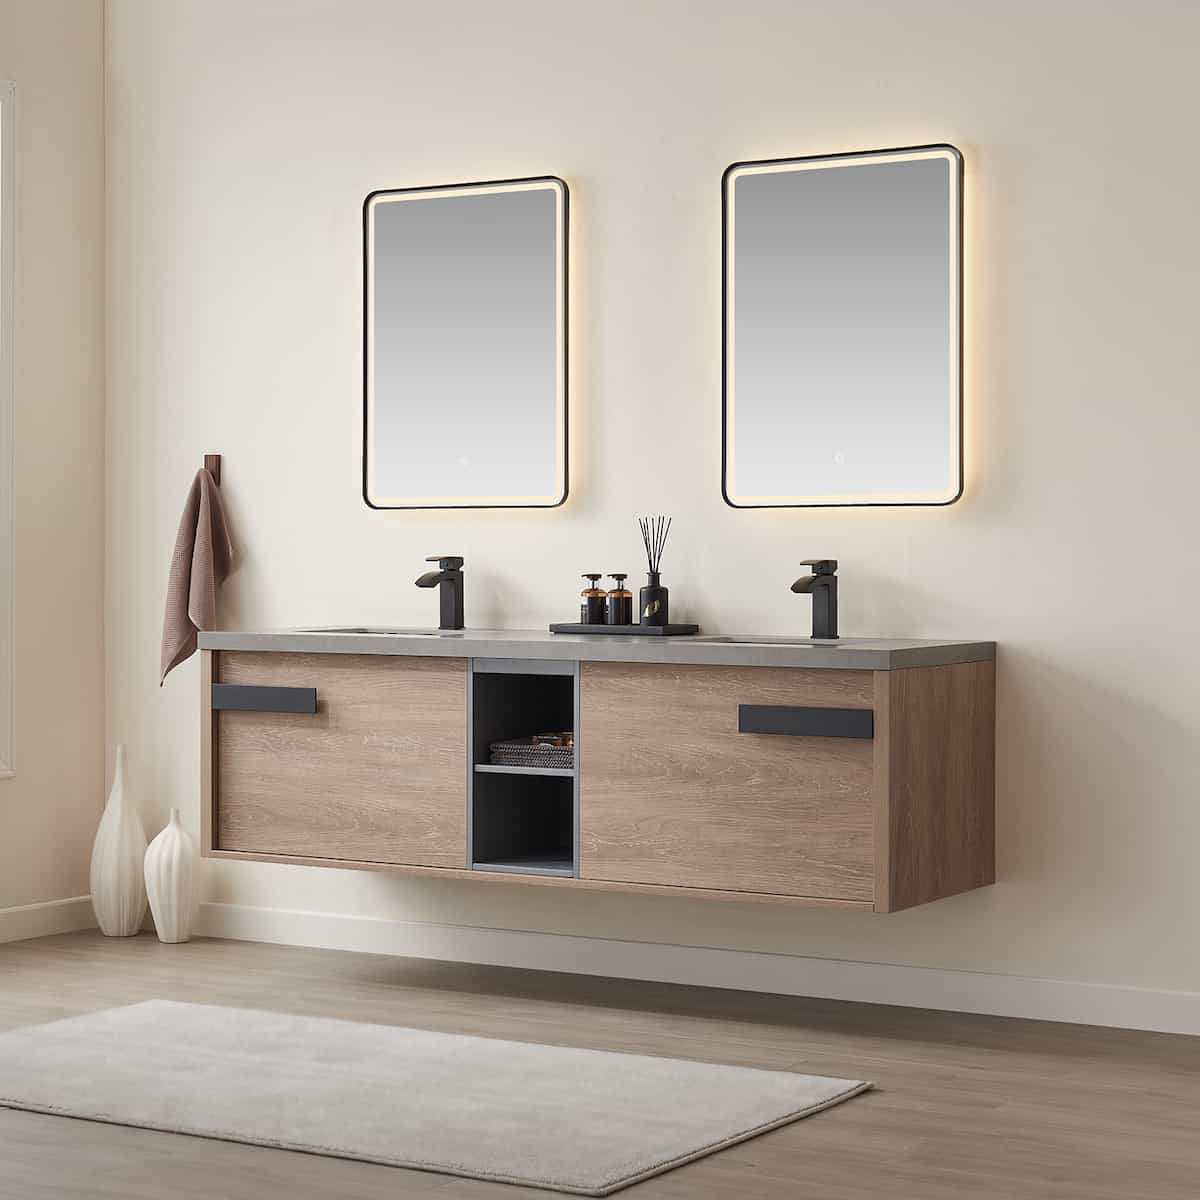 Vinnova Carcastillo 72 Inch Wall Mount Double Sink Bath Vanity in North American Oak with Grey Sintered Stone Top With Mirrors Side 703272-NO-WK #mirror_with mirror